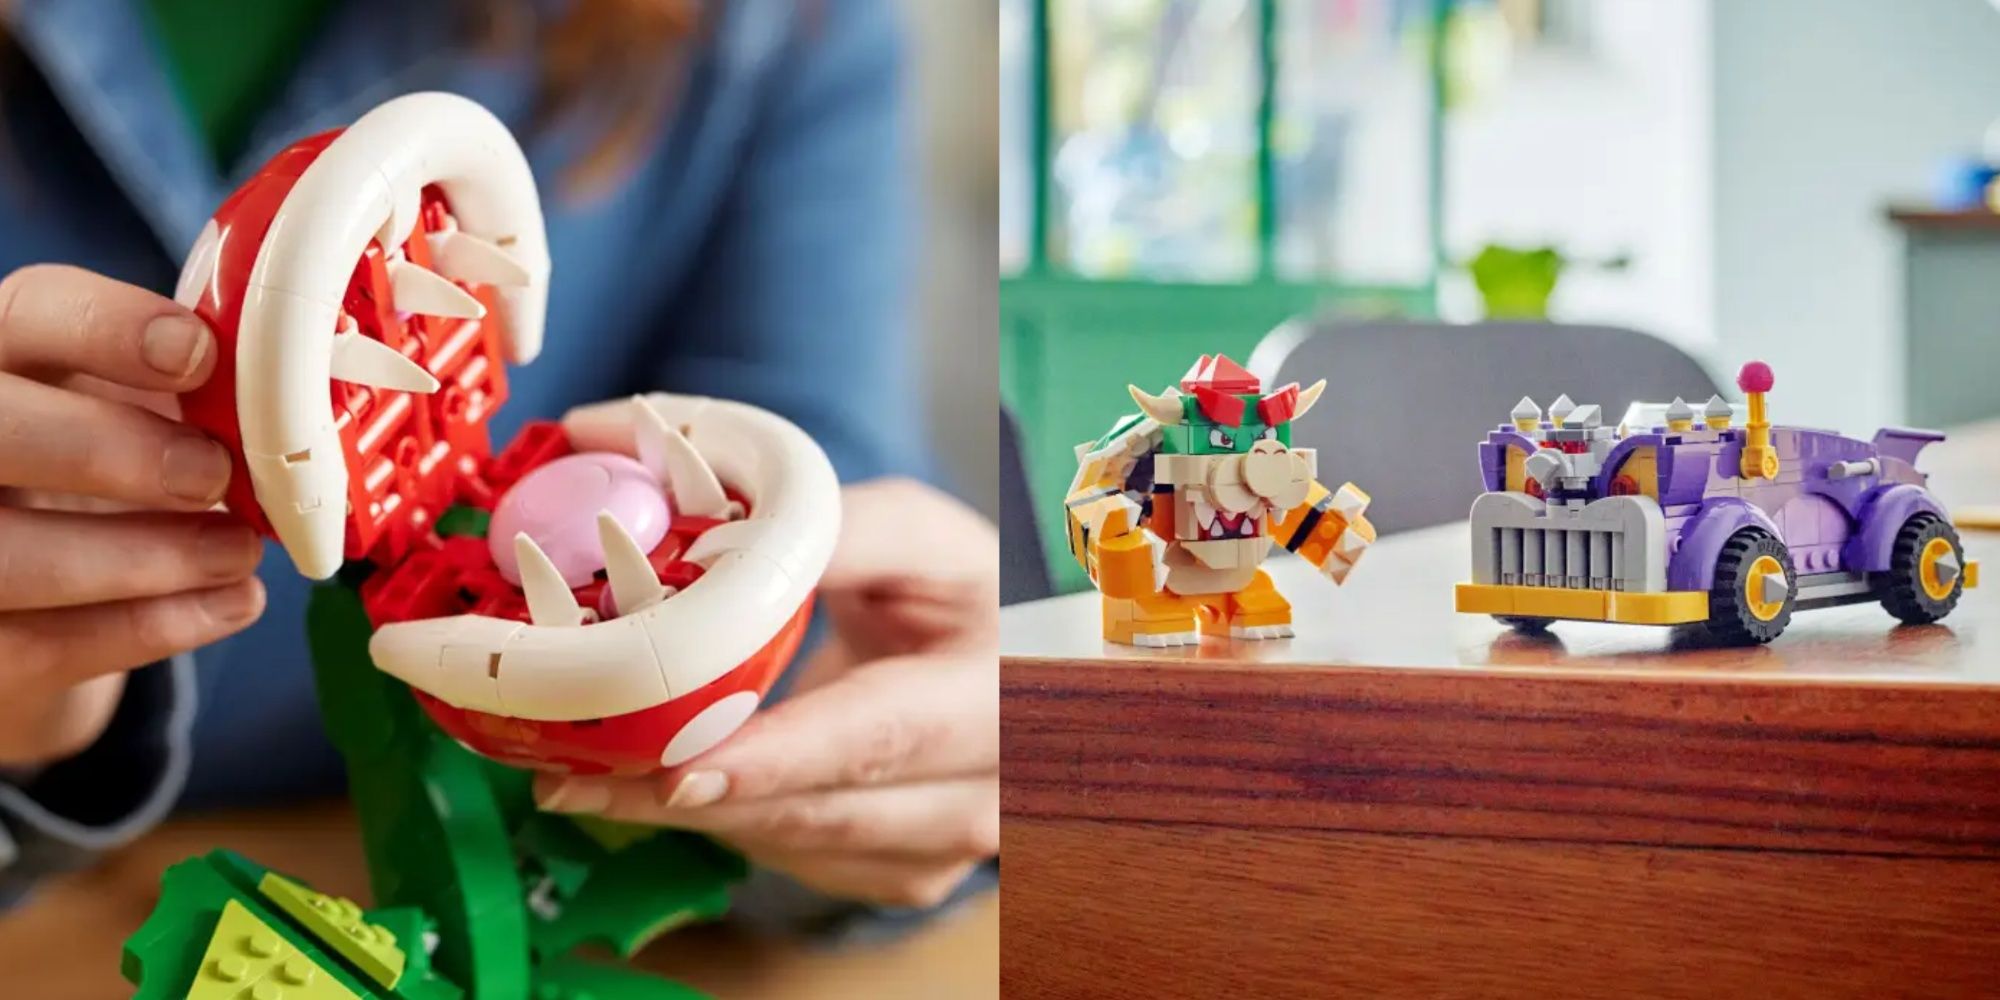 piranha plant and bowser's muscle car lego sets